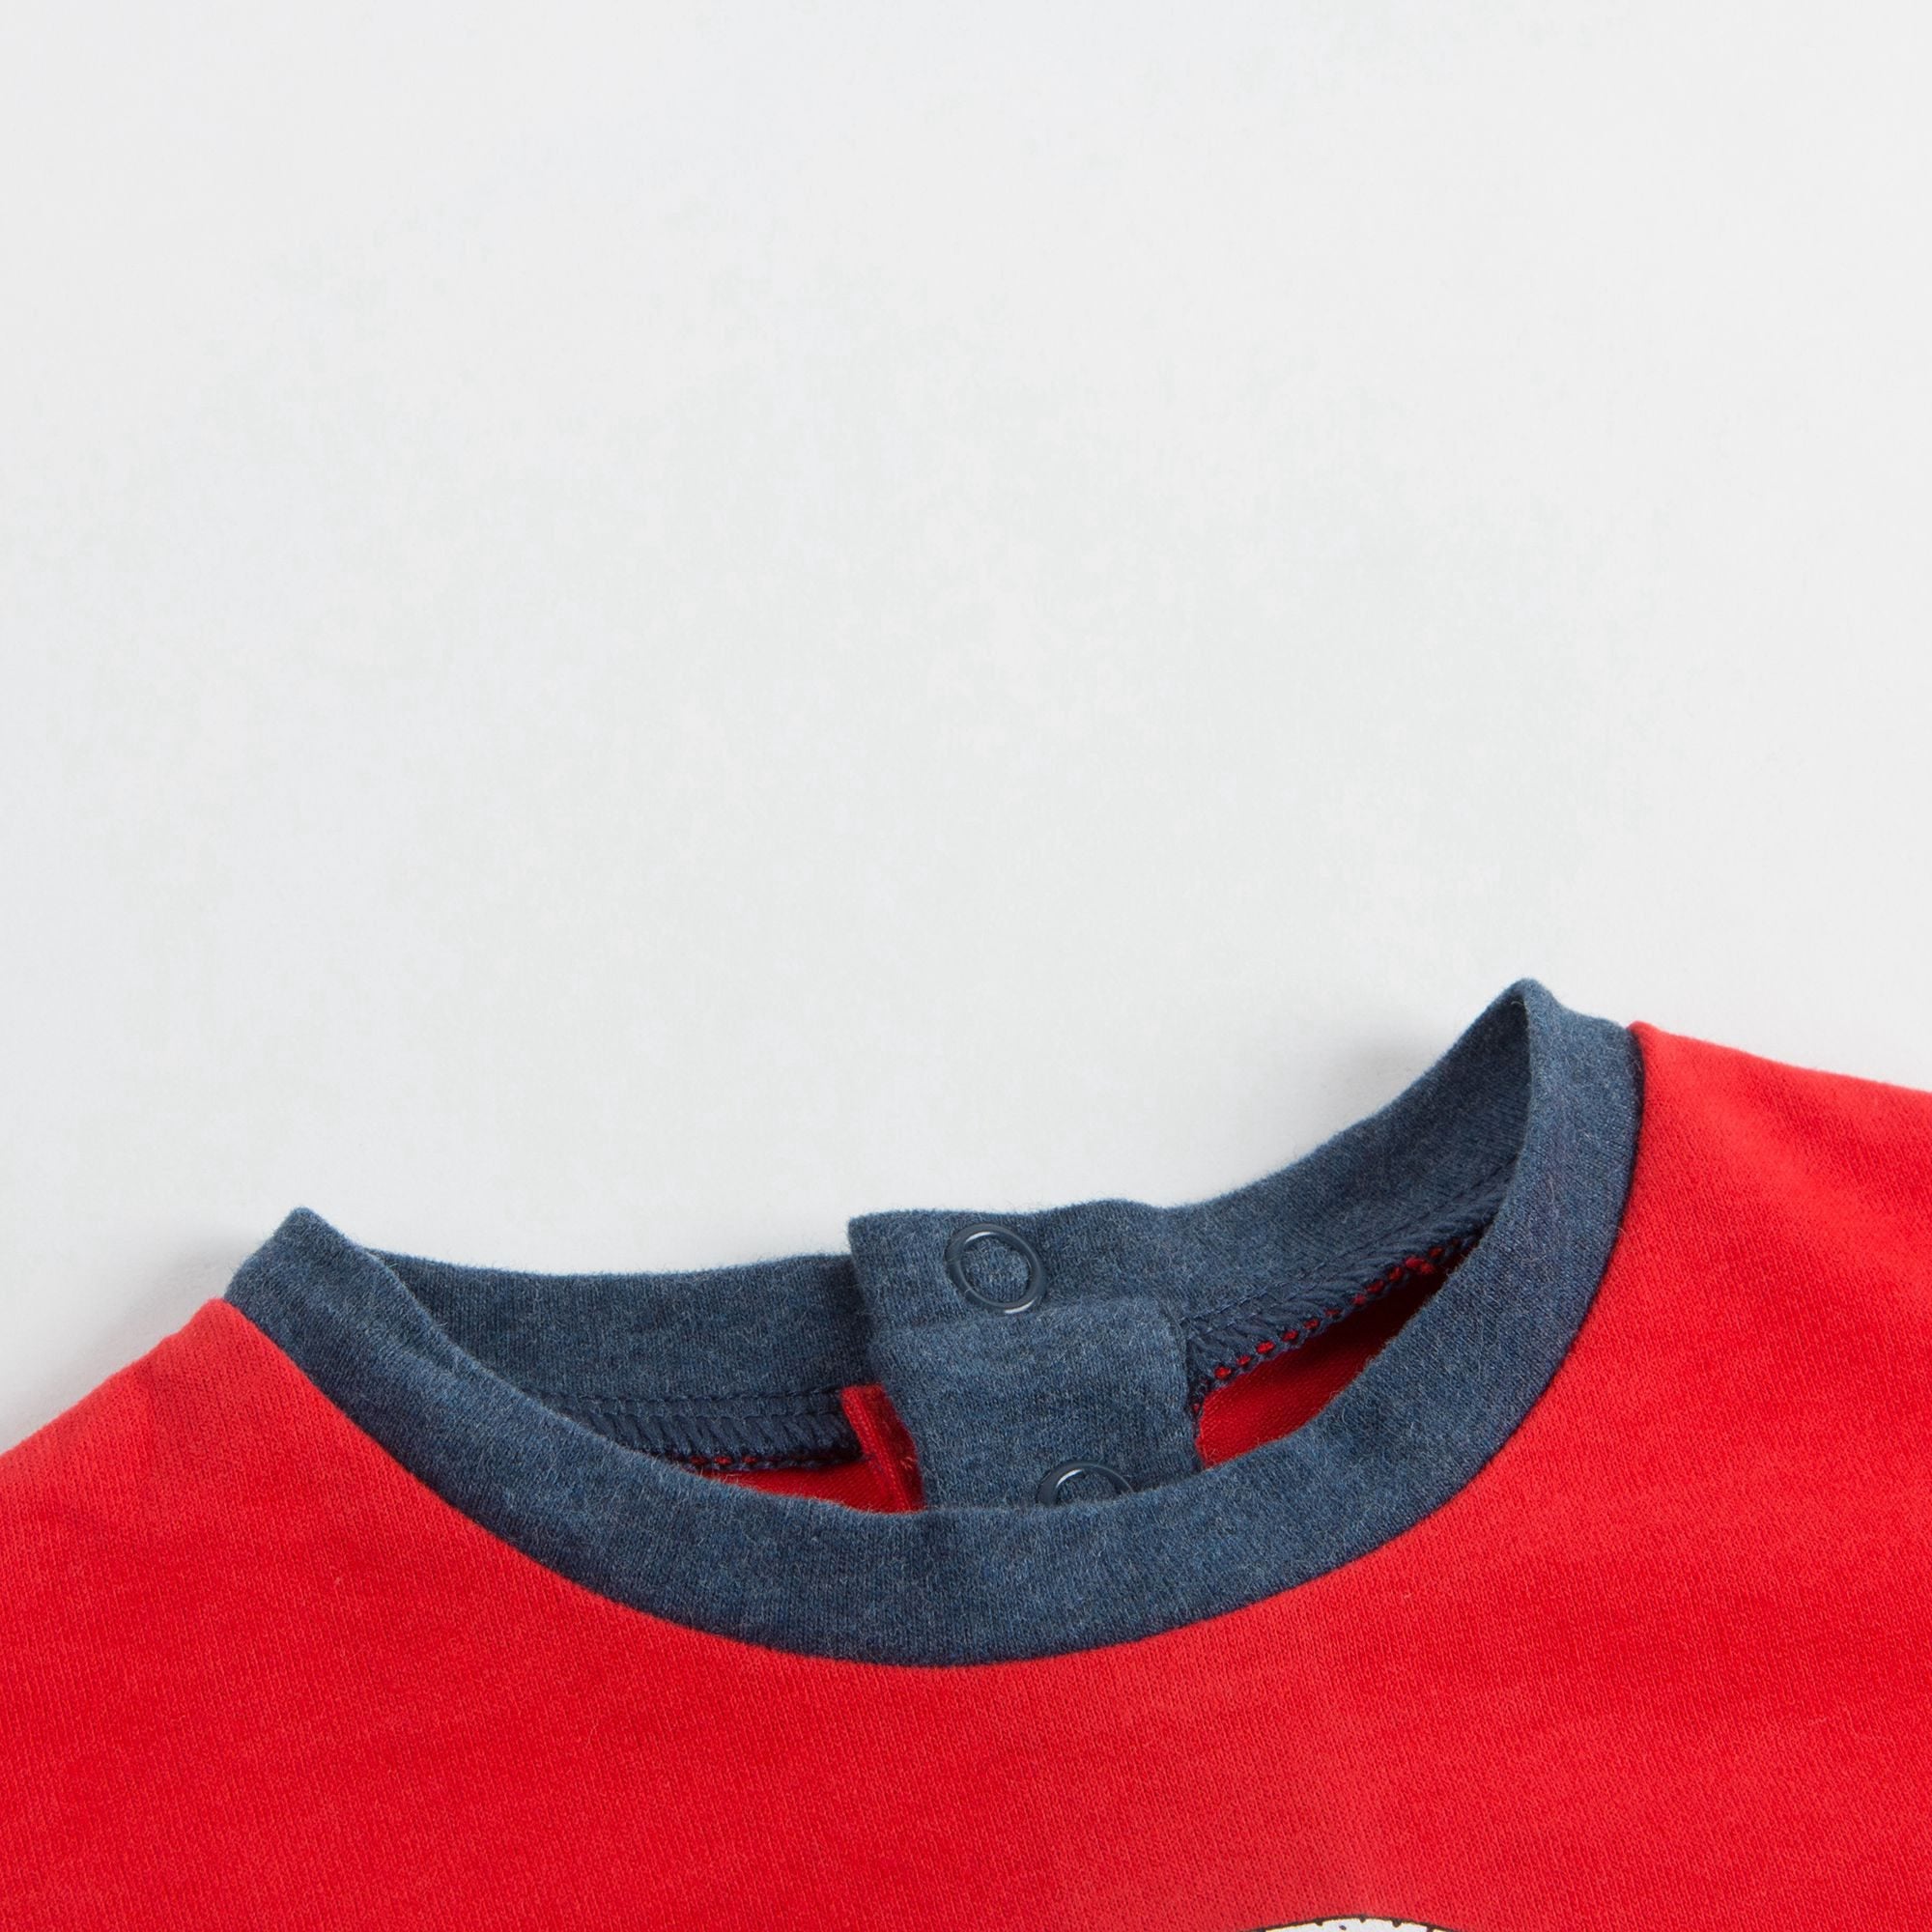 Baby Boys Red Mr Marc T-Shirt